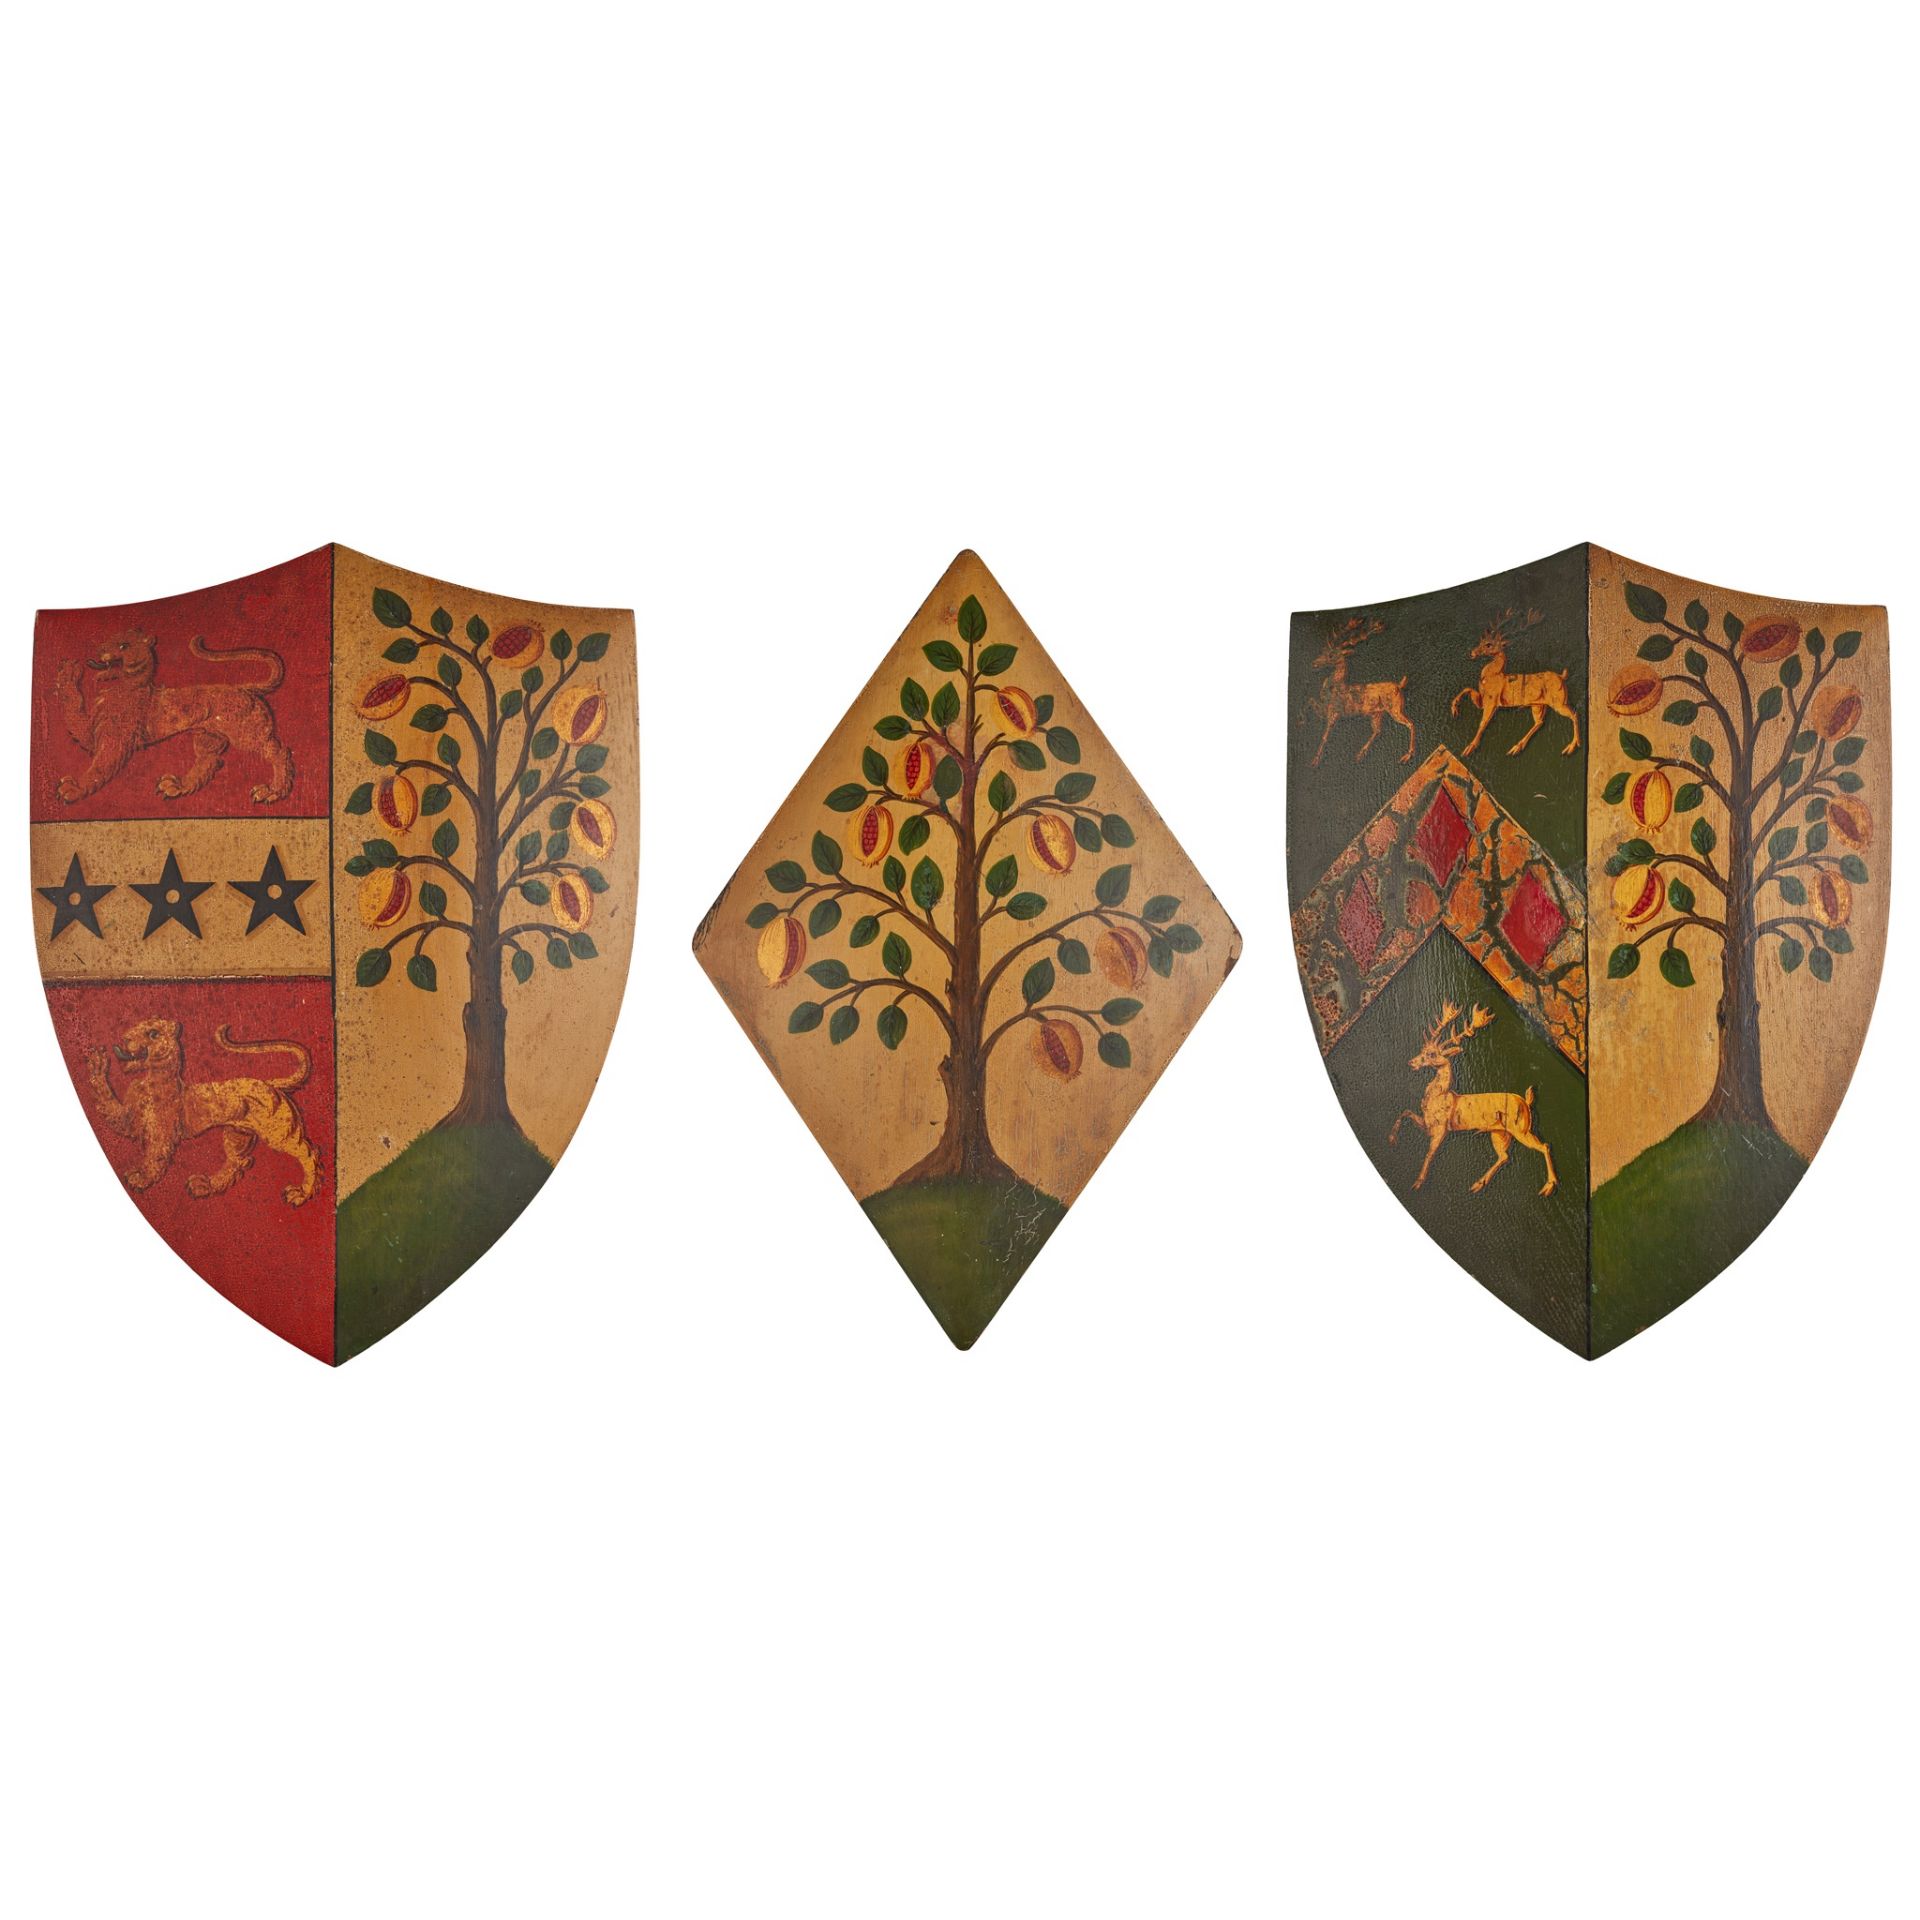 THREE POLYCHROMED AND PARCEL-GILT OAK ARMORIALS, BY W. & A. MUSSETT, LONDON